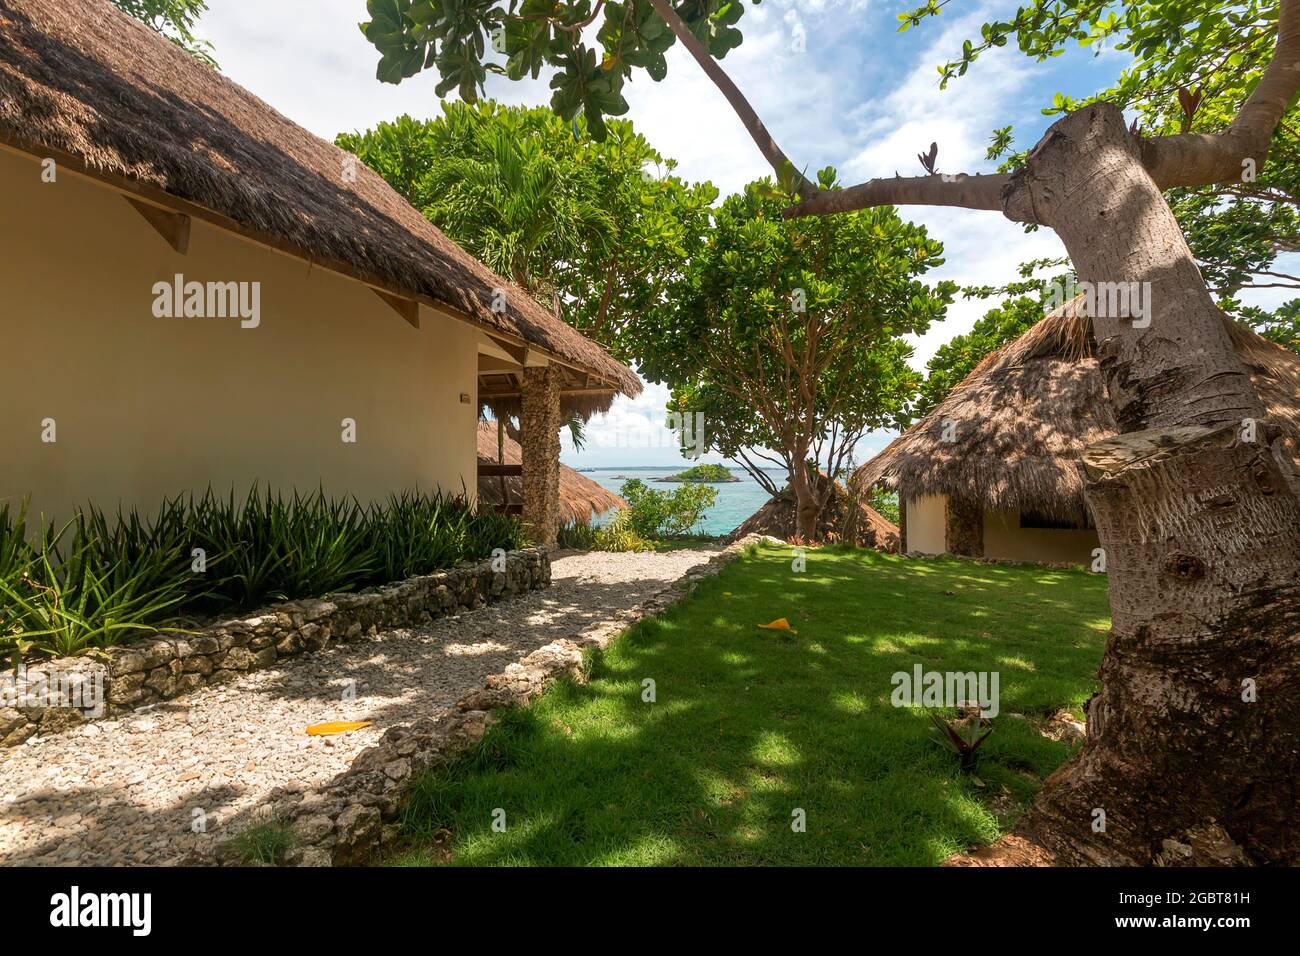 trees and room at a resort Stock Photo